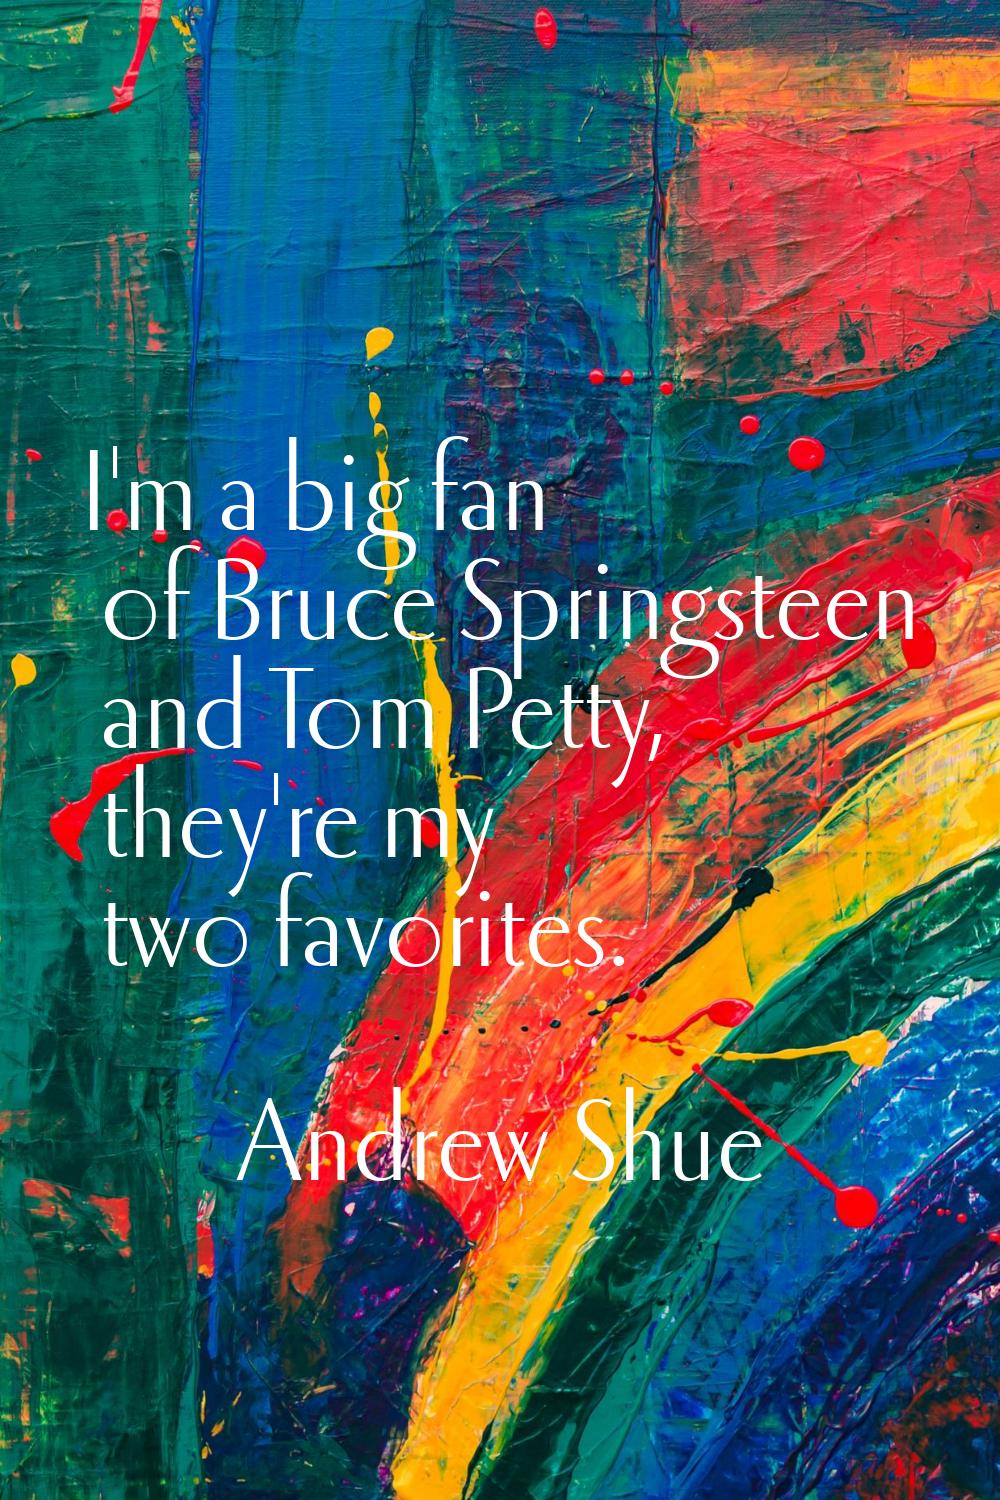 I'm a big fan of Bruce Springsteen and Tom Petty, they're my two favorites.